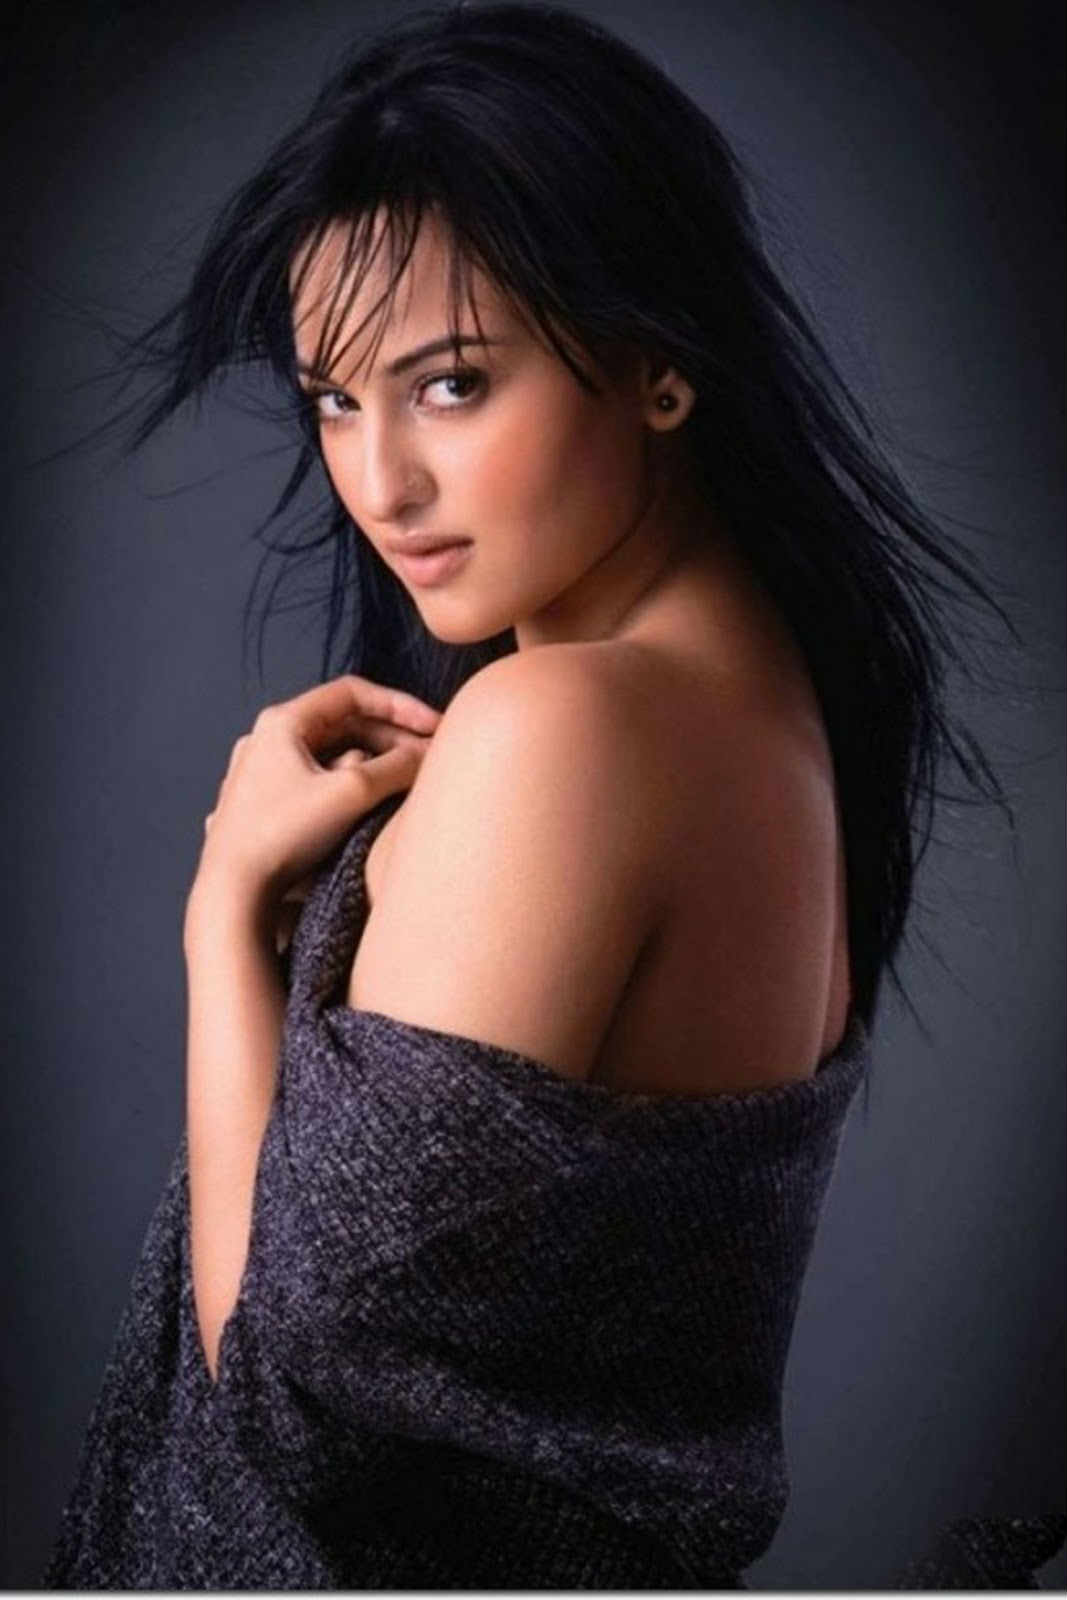 Sonakshi Sinha Opens Up About Her (Creative) Beauty Choices | Femina.in